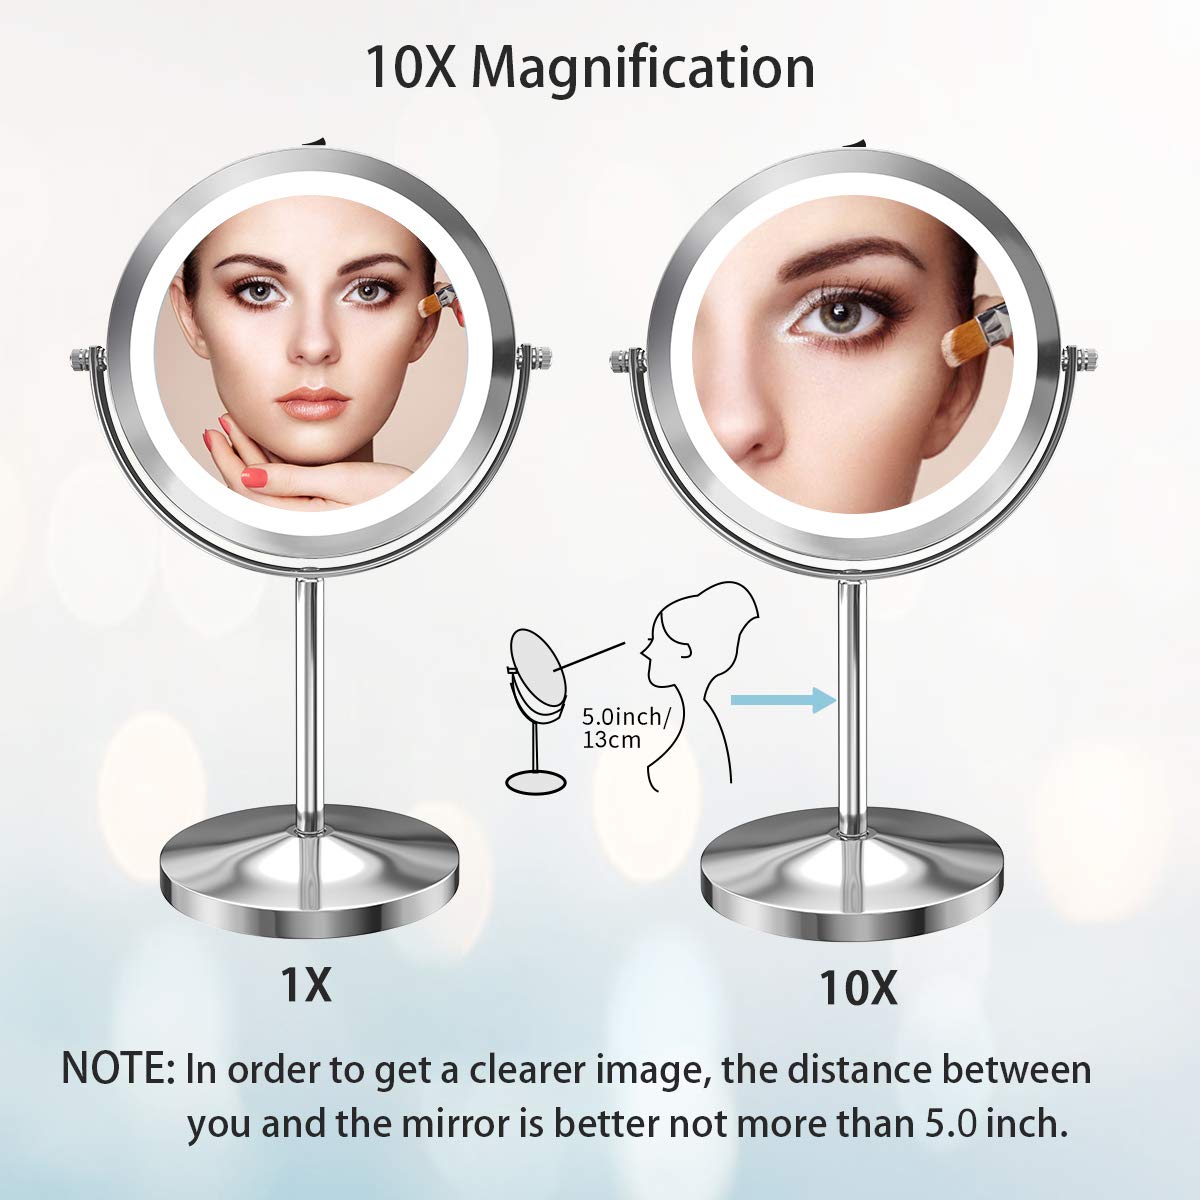 The mirror has 1x and 10x magnification. The picture shows the same image using both magnifications.